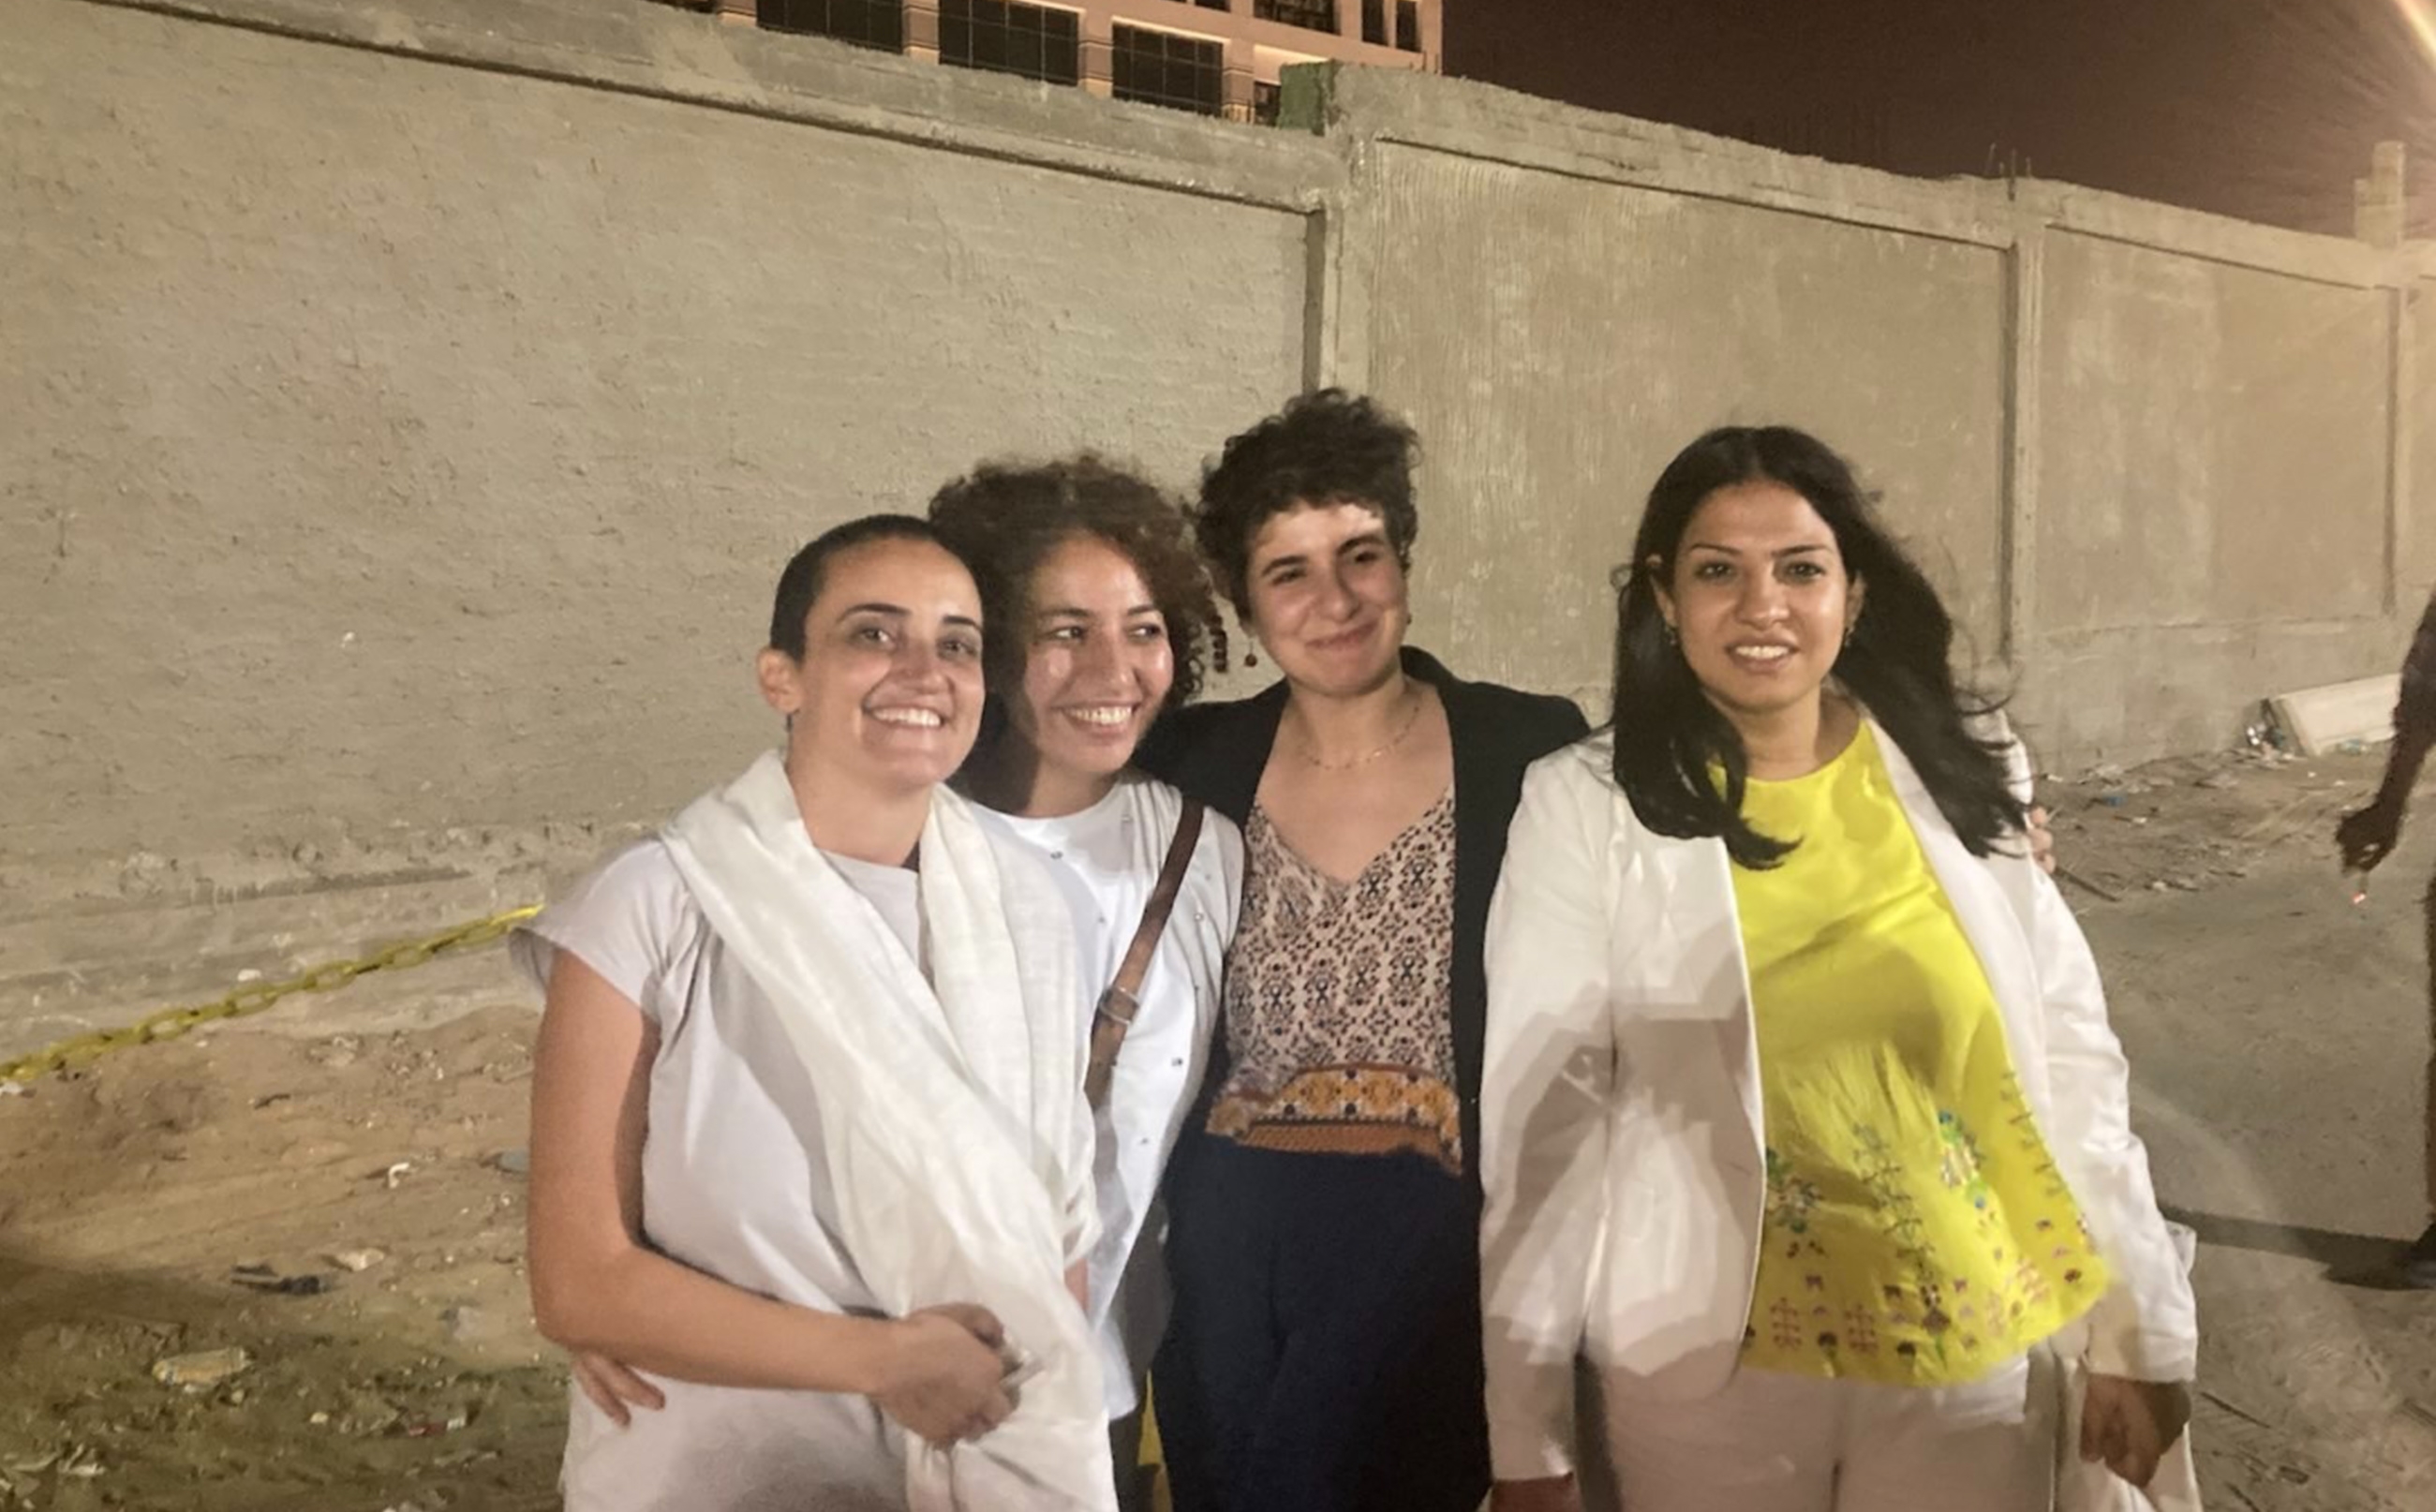 (R-L) Mada Masr Editor-in-Chief Lina Attalah, journalists Beesan Kassab, Sara Seif Eddin and Rana Mamdouh pose in front the Cairo Appeals Prosecution after being released on bail (Mada Masr)